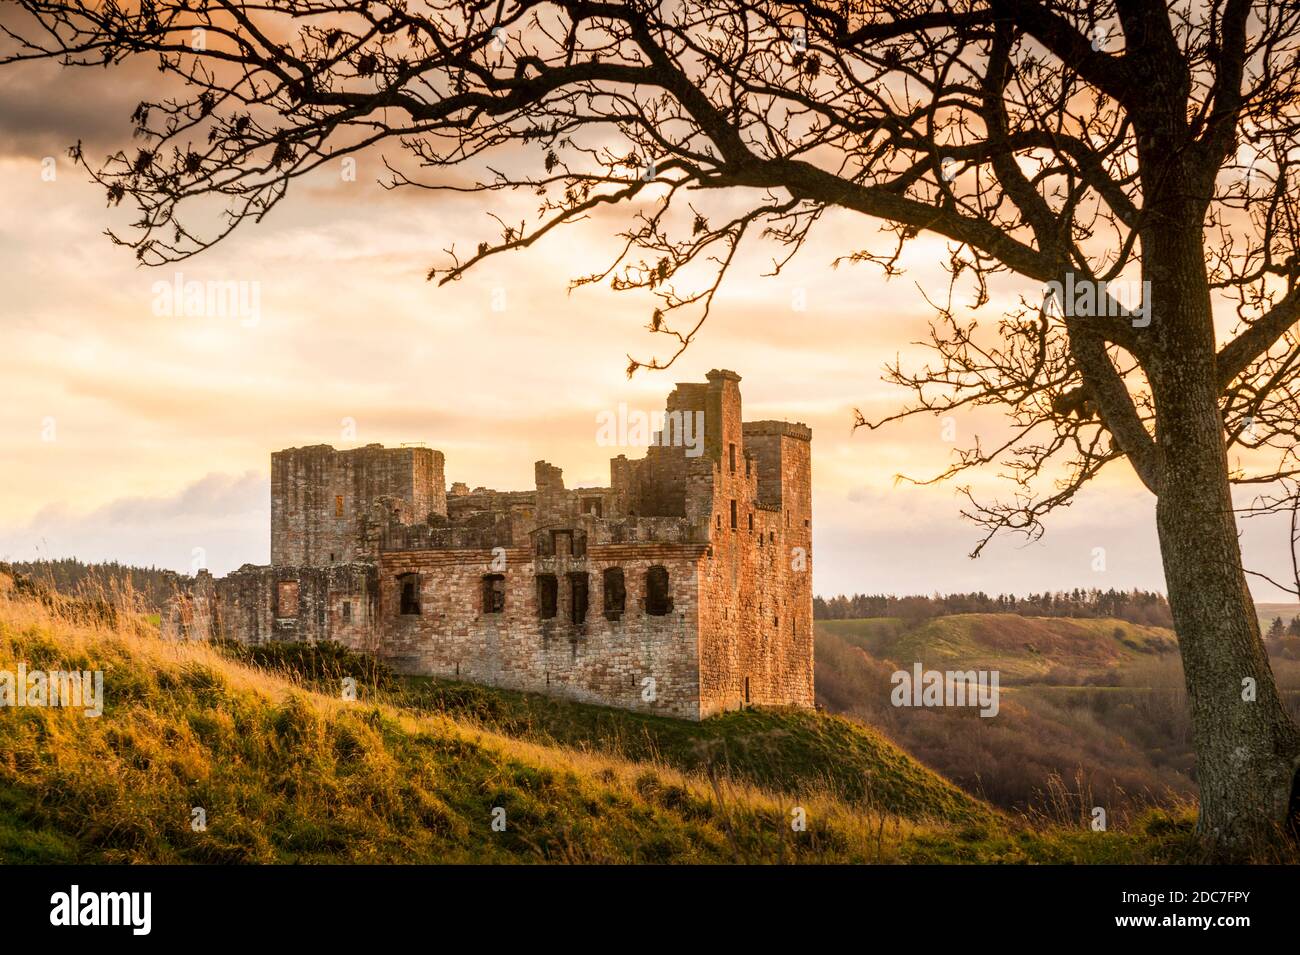 Late 14th Century N A High Resolution Stock Photography and Images - Alamy